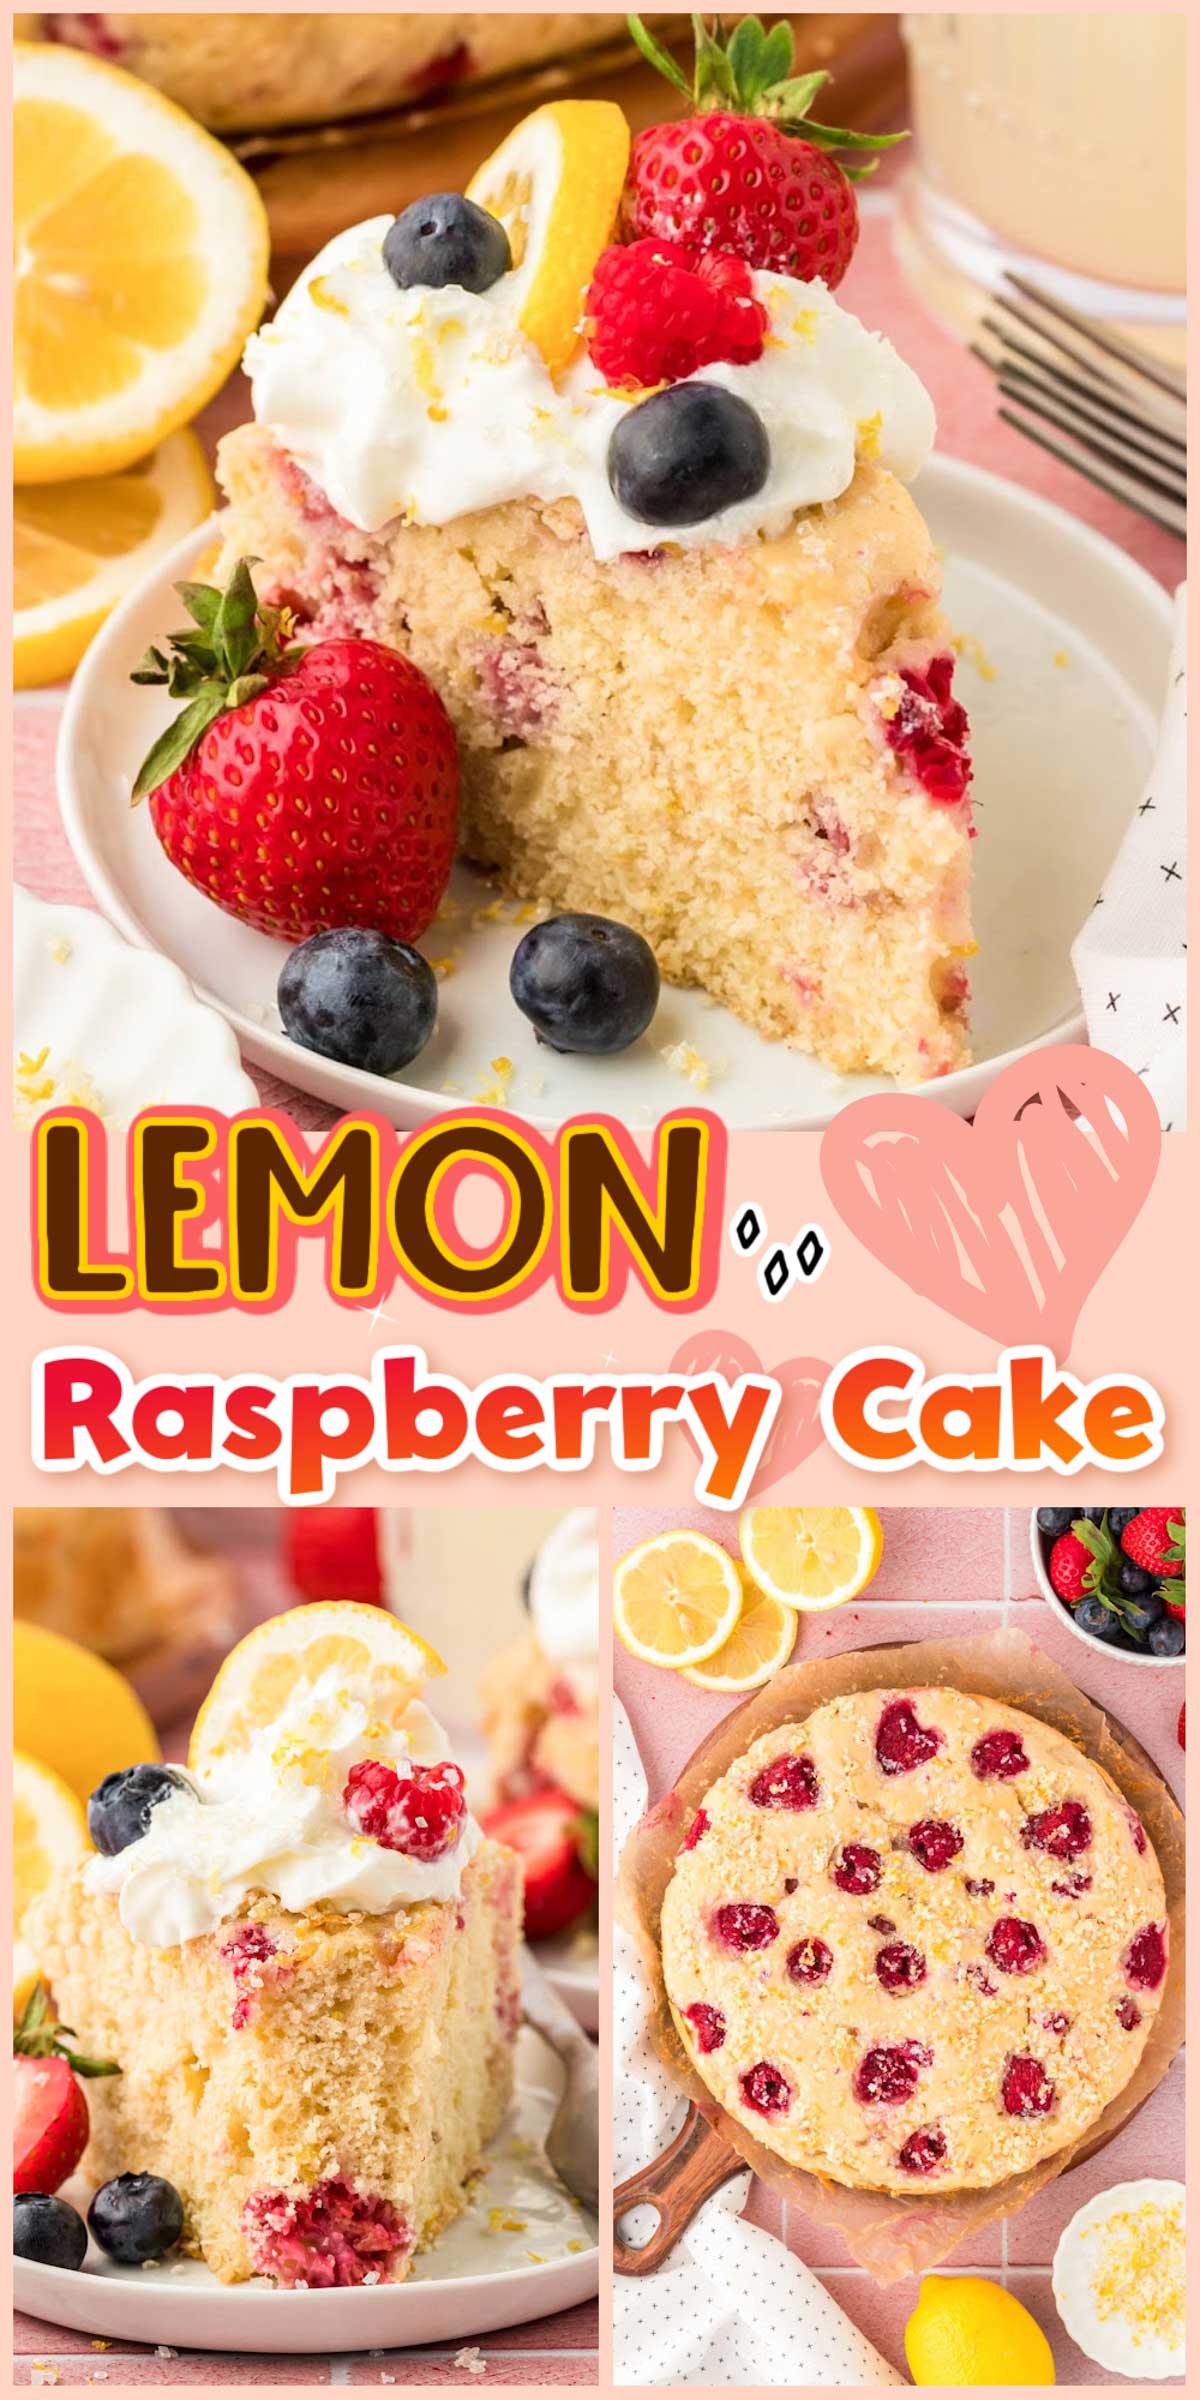 Lemon Raspberry Cake Recipe is an easy-to-make dessert that's made with juicy raspberries and fresh lemon zest, creating a standout flavor! It takes just 15 minutes to prep before sliding it into the oven to bake! via @sugarandsoulco